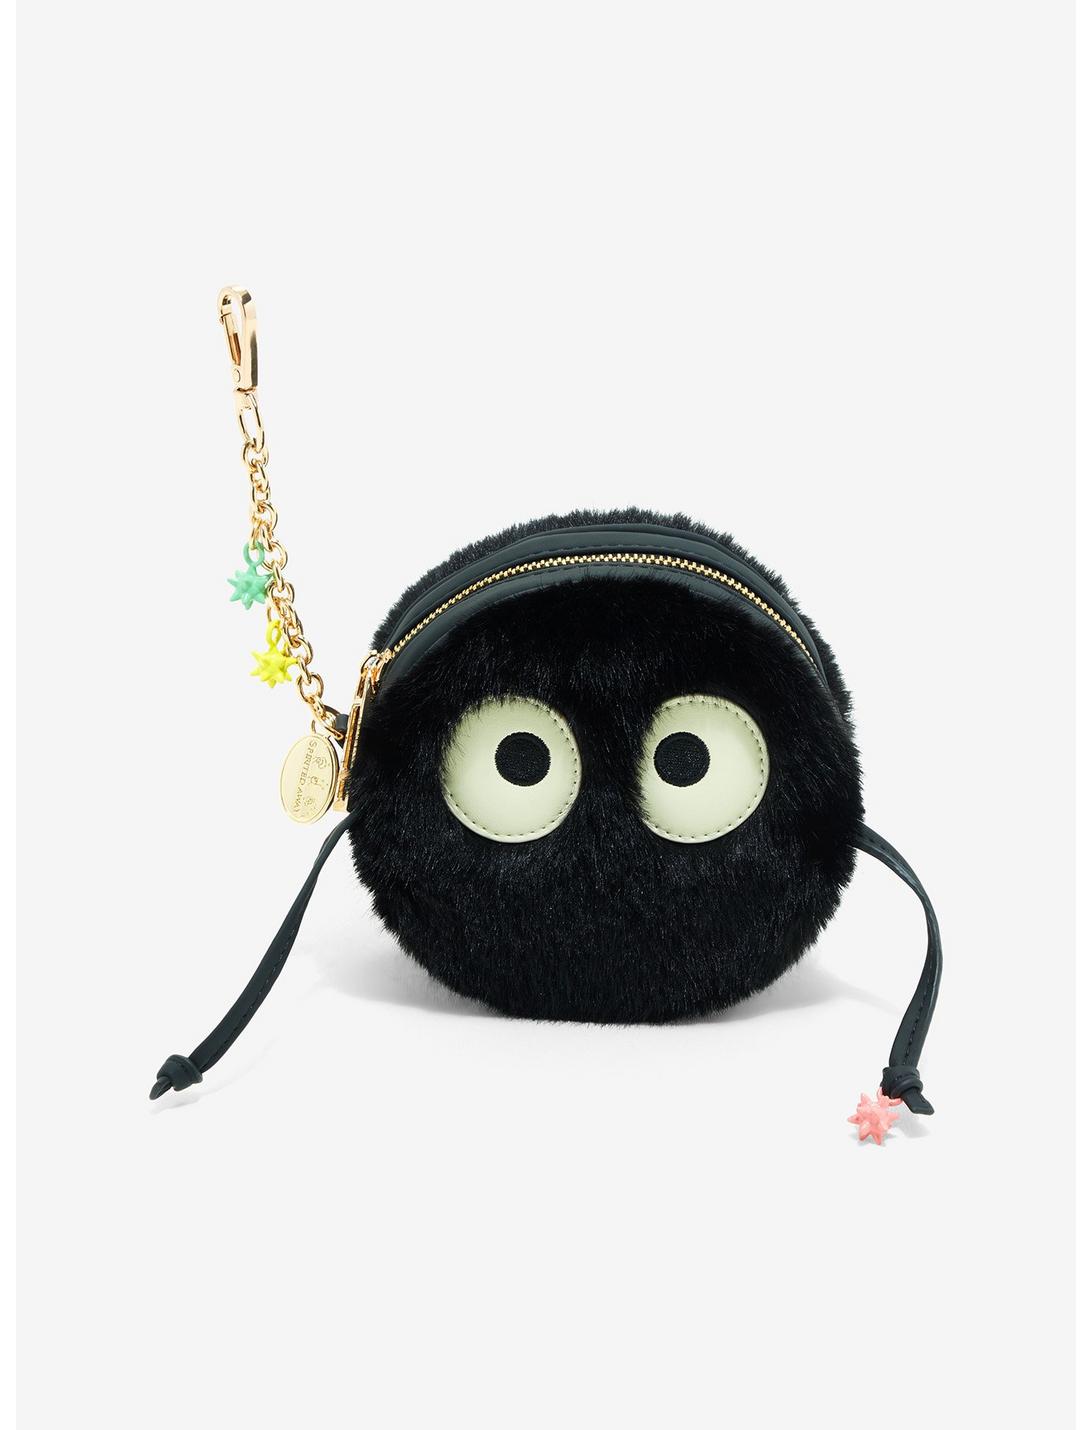 Our Universe Studio Ghibli Spirited Away Soot Sprite Figural Coin Purse -  BoxLunch Exclusive